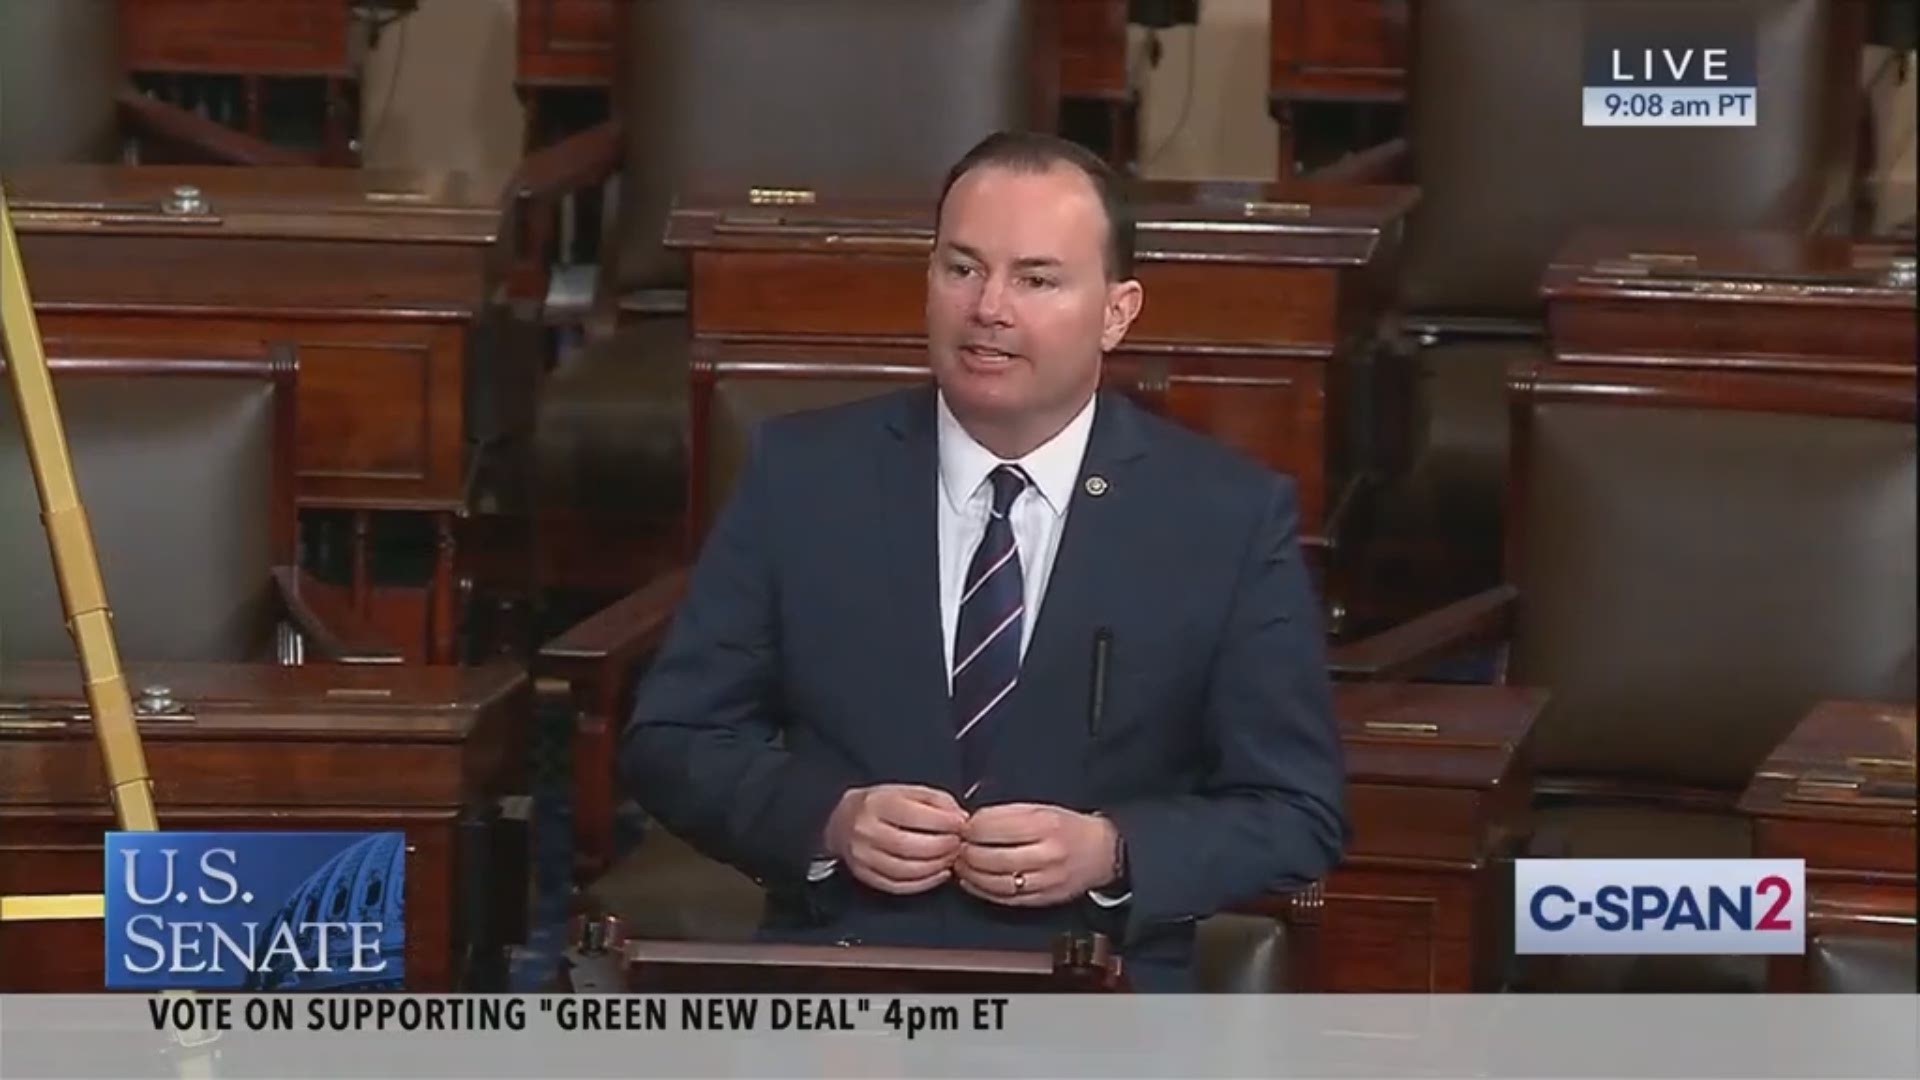 Sen. Mike Lee, R-Utah, used unusual imagery such as dinosaurs, Tauntauns, Sharknado and Aquaman to argue against passage of the Green New Deal.